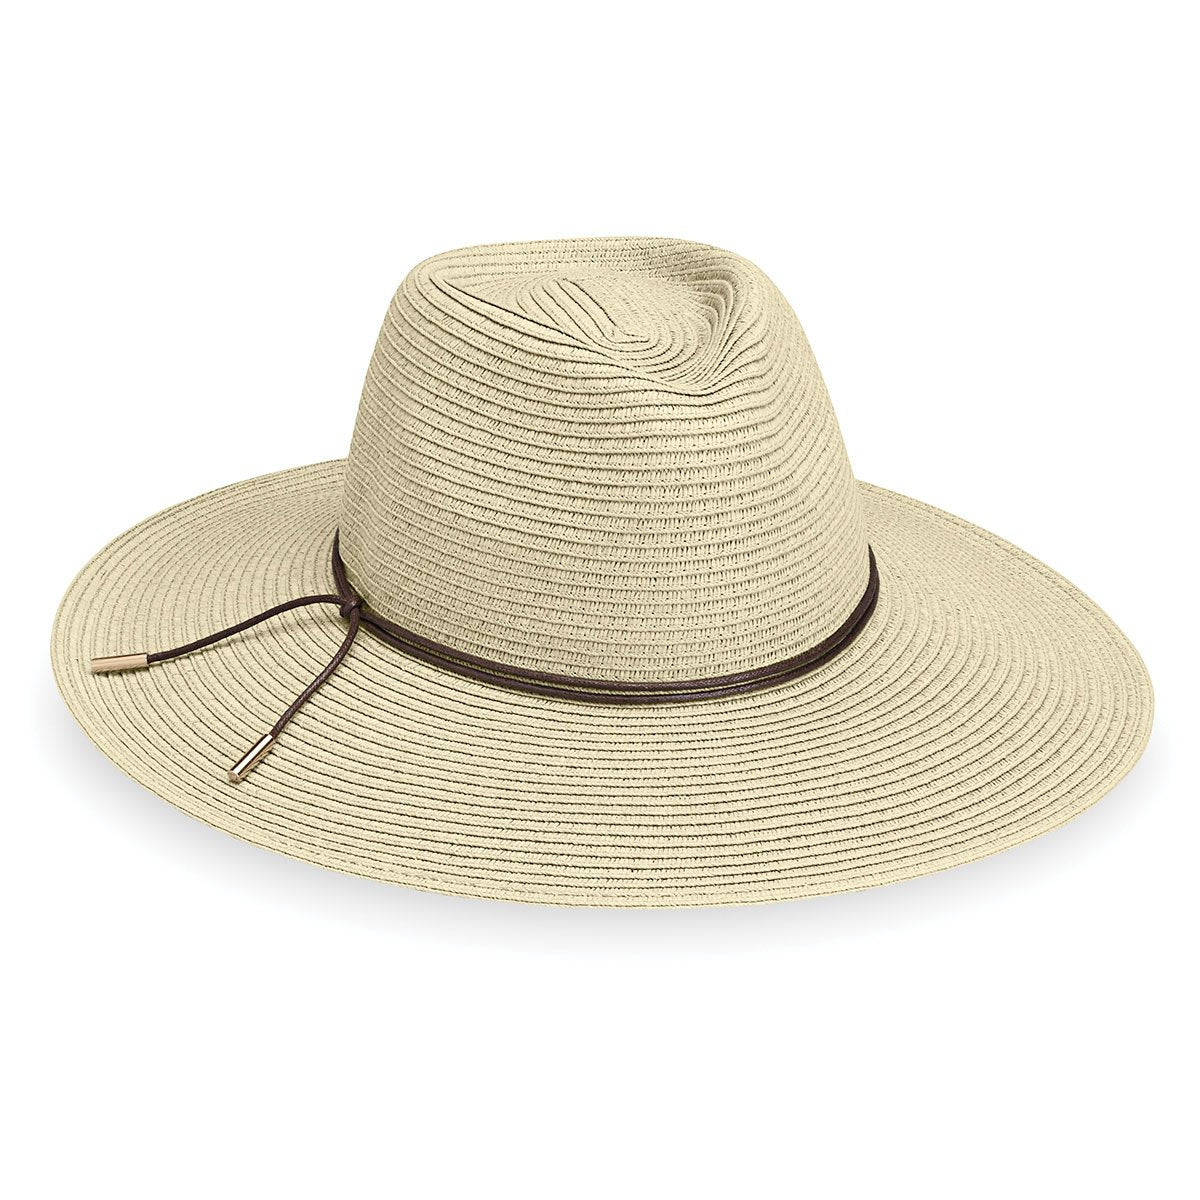 Featuring Women's Packable Wide Brim Fedora Style Montecito UPF Travel Sun Hat from Wallaroo